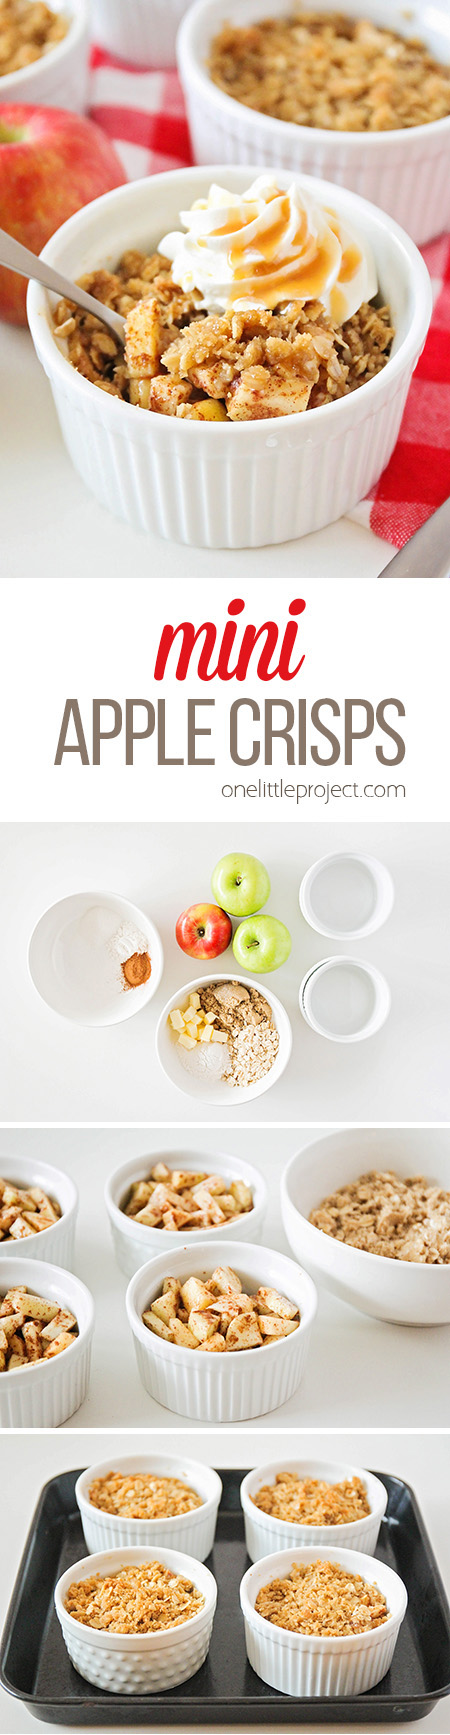 These mini apple crisps are the perfect individual-sized dessert! They take just a few minutes to put together, and bake into a deliciously sweet treat!